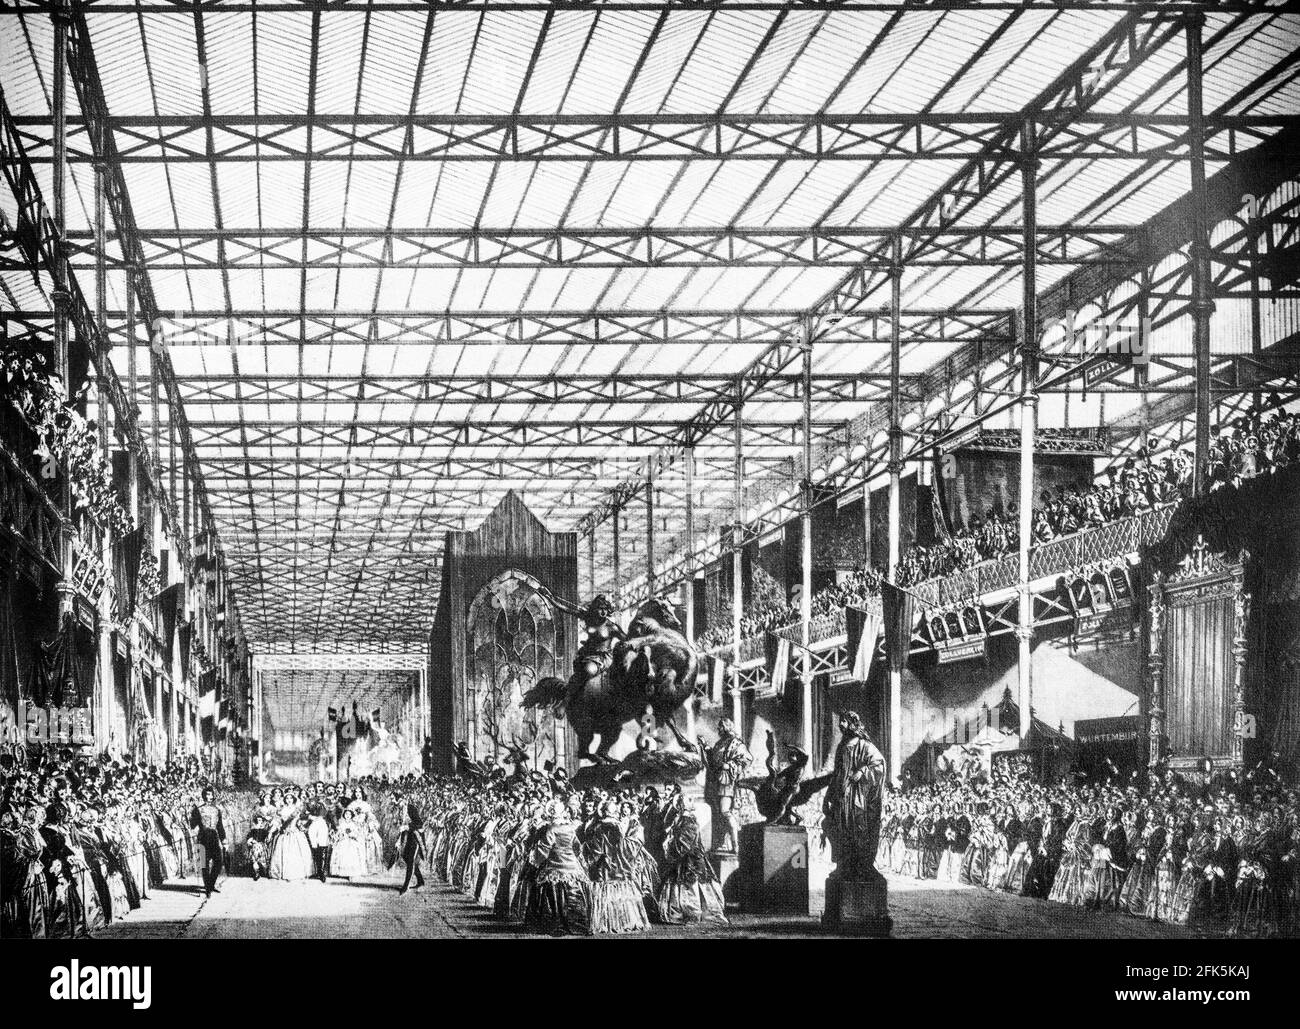 The royal party at the Great Exhibition, (sometimes referred to as the Crystal Palace Exhibition in reference to the temporary structure in which it was held). The international exhibition, took place in Hyde Park, London, from 1 May to 15 October 1851, the first in a series of World's Fairs, exhibitions of culture and industry that became popular in the 19th century. The Great Exhibition was organised by Henry Cole and by Prince Albert, husband of the reigning monarch of the United Kingdom, Queen Victoria. Stock Photo